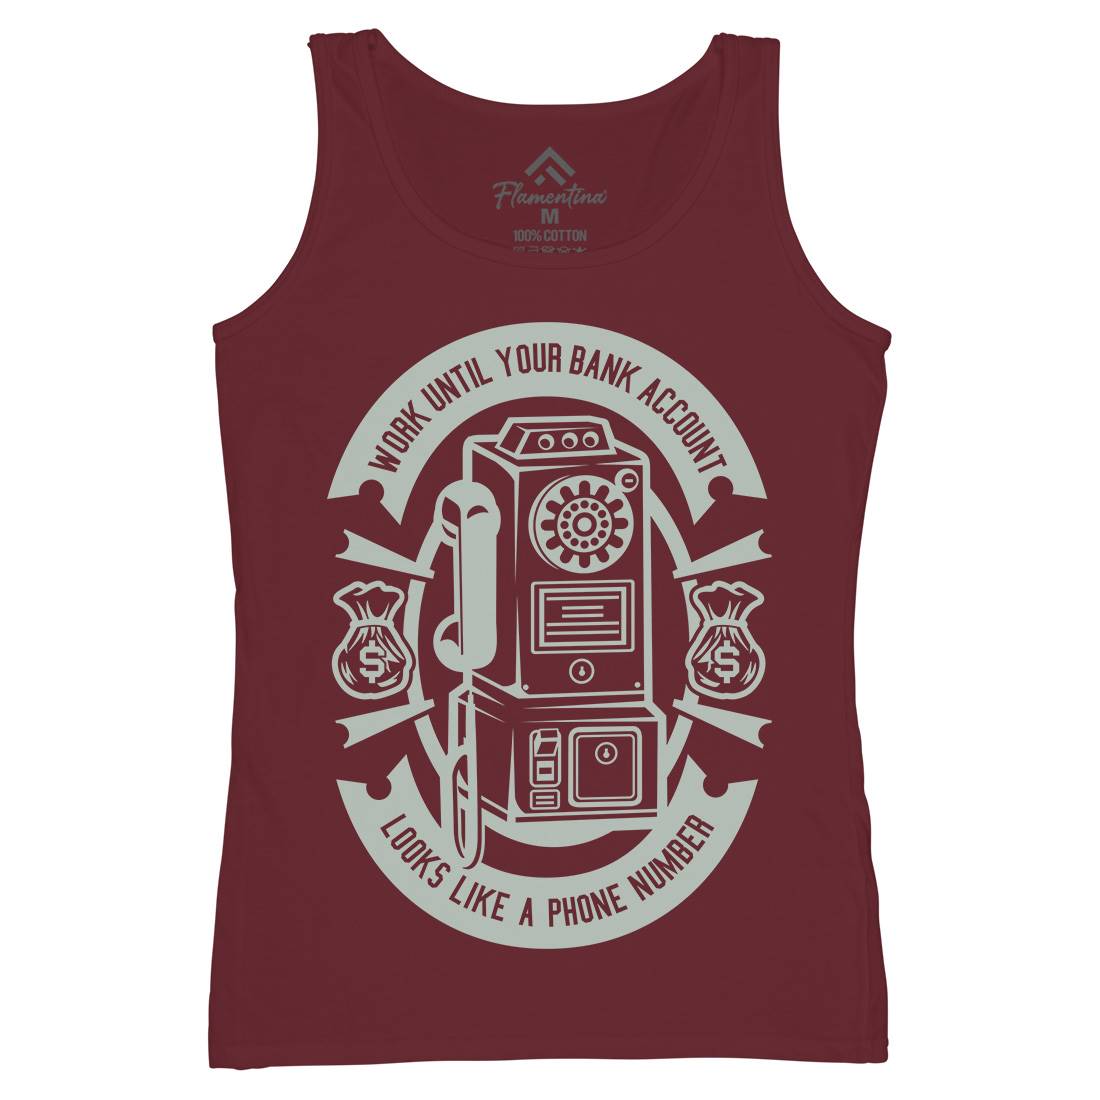 Phone Number Womens Organic Tank Top Vest Quotes A258